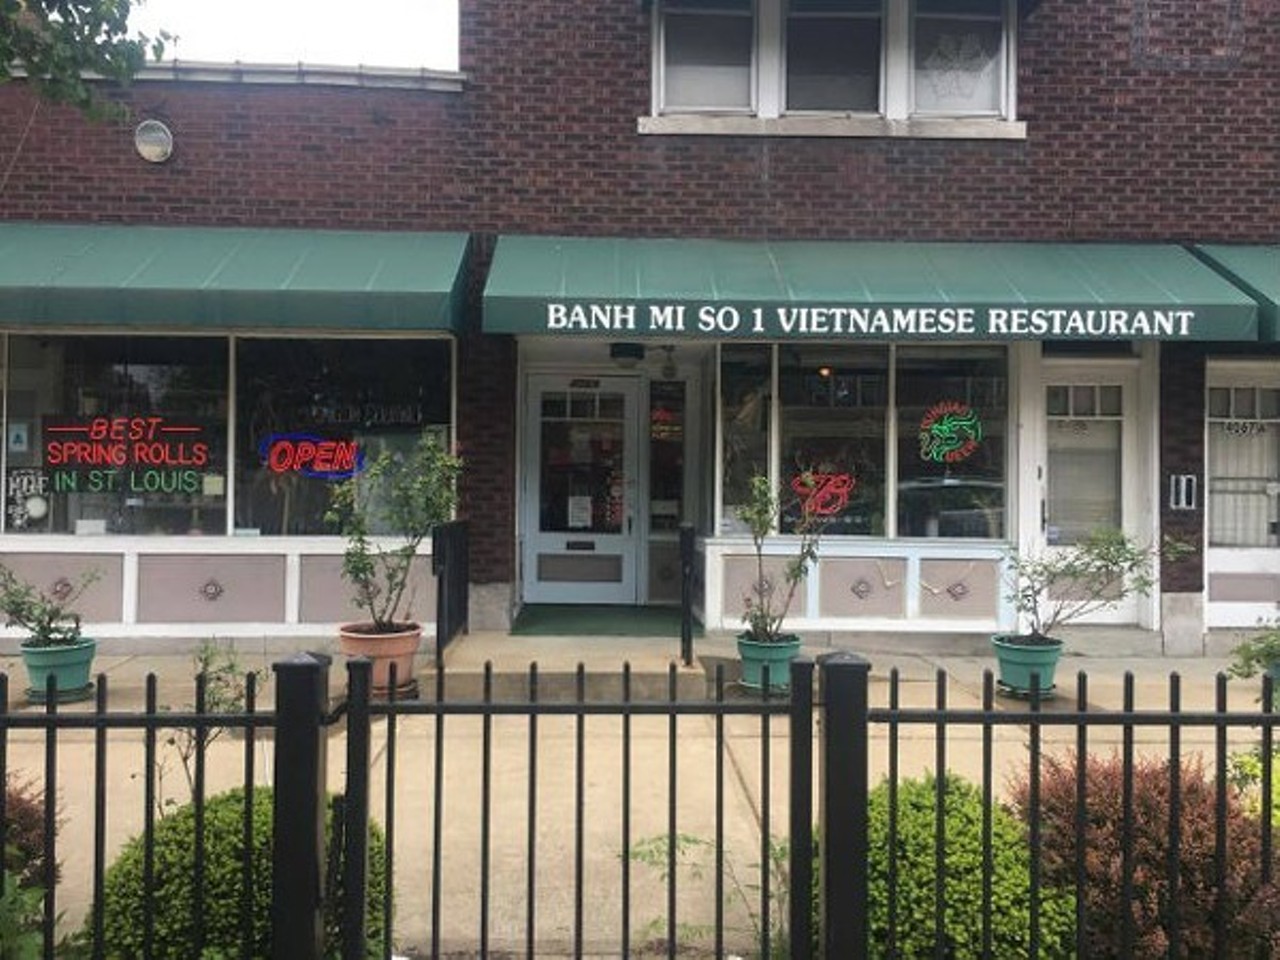 Banh Mi So
4071 S. Grand Blvd.
Thomas and Lynn Truong serve the area's best spring rolls. And egg rolls. And charred pork banh mi. And, well, basically everything. - Cheryl Baehr
Photo courtesy of Cheryl Baehr